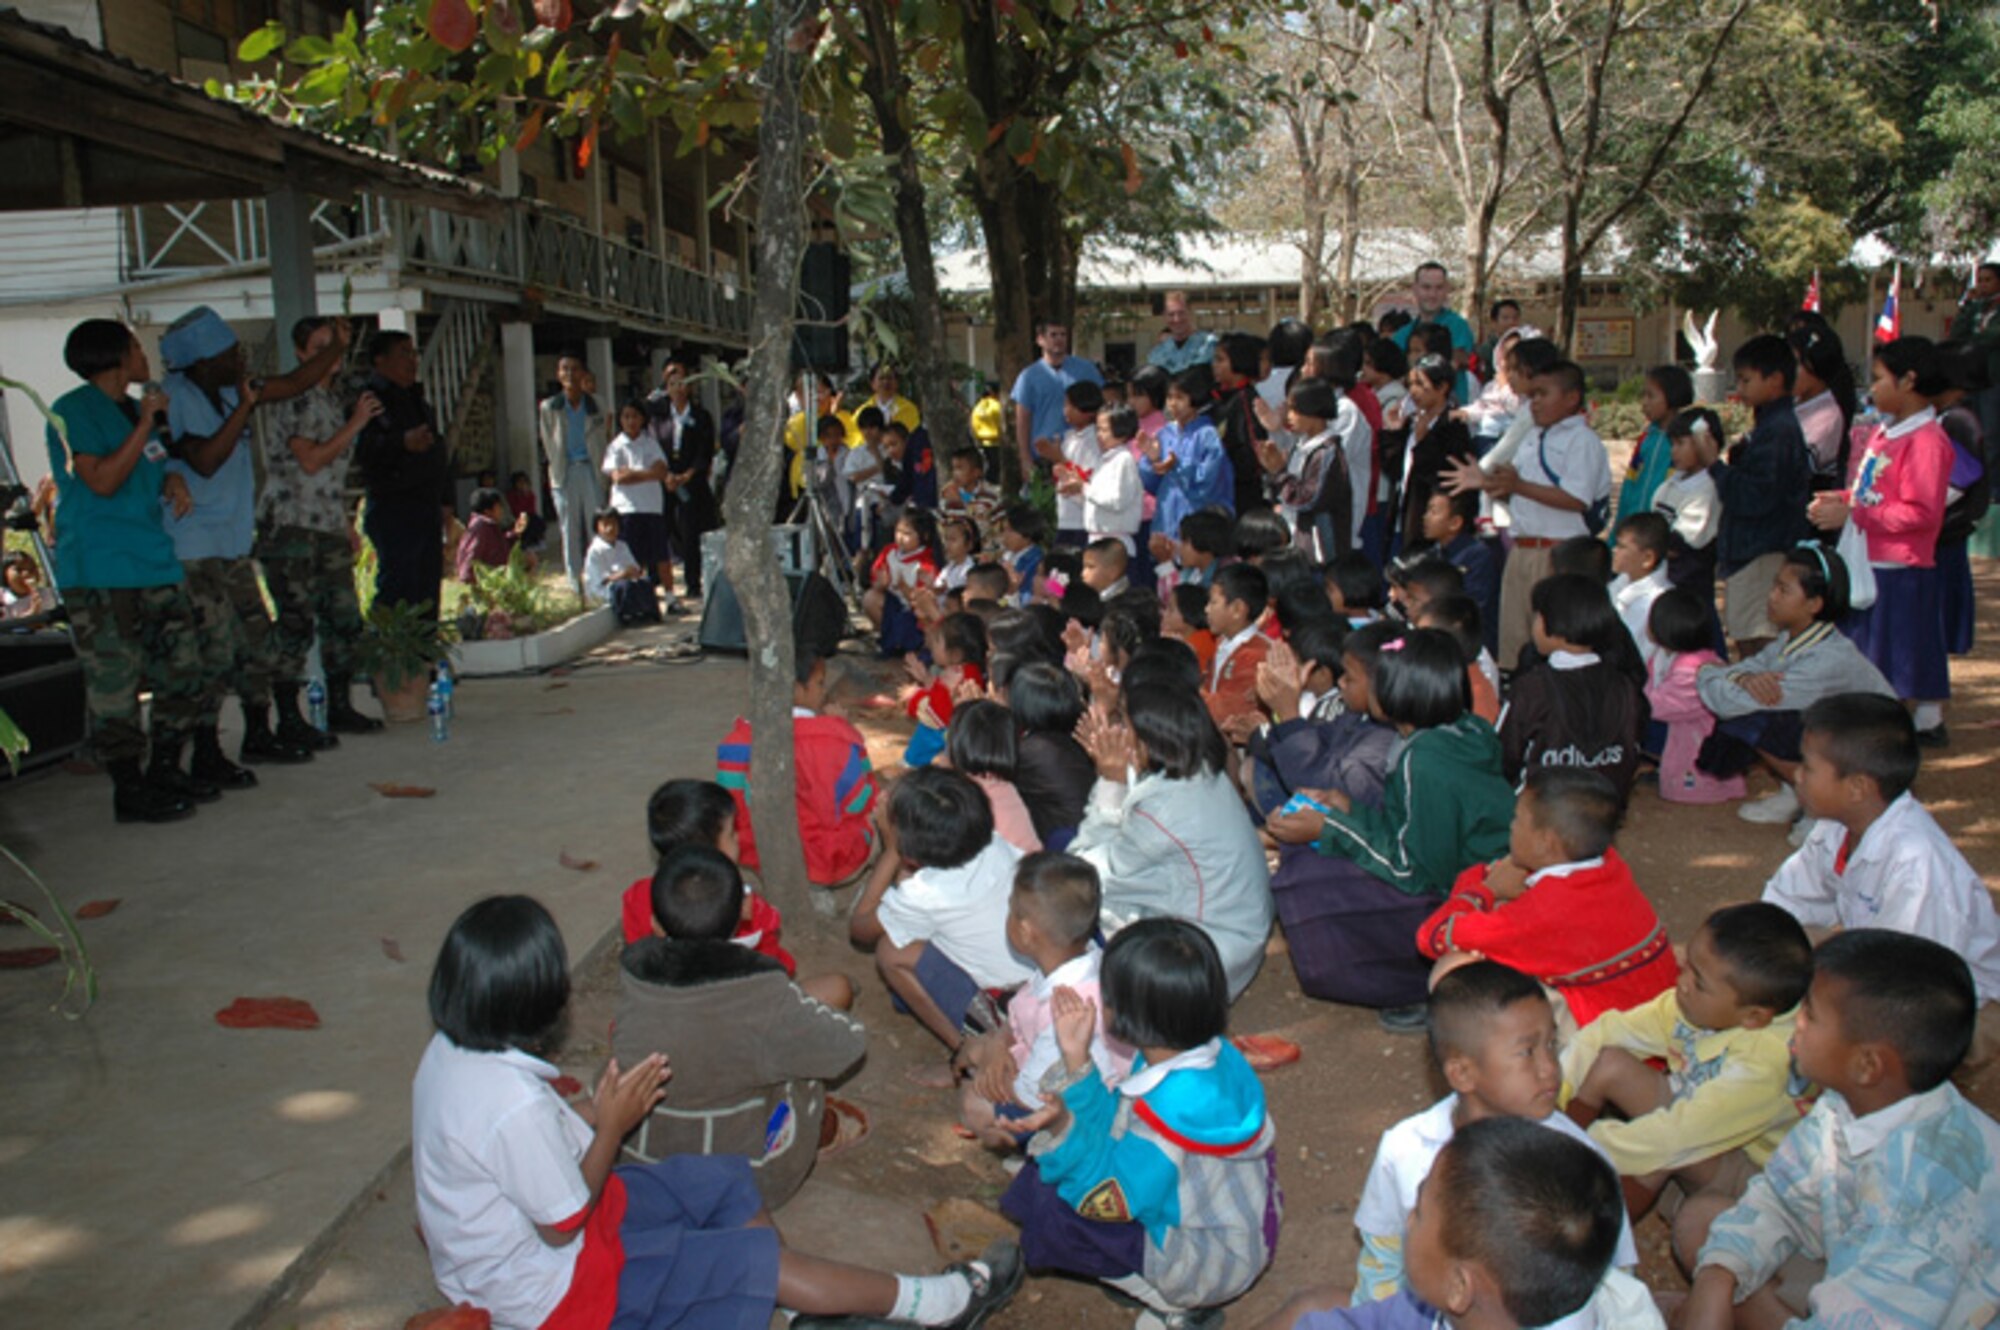 The U.S. dental staff takes time out of the day to entertain the students of Ban Chaimongkon school in Korat, Thailand. Medical personnel from the U.S., Thai, and Singapore Air Forces performed medical, dental and eye exams for members of the school community. (USAF photo by  Staff Sgt. Betty Squatrito-Martin)